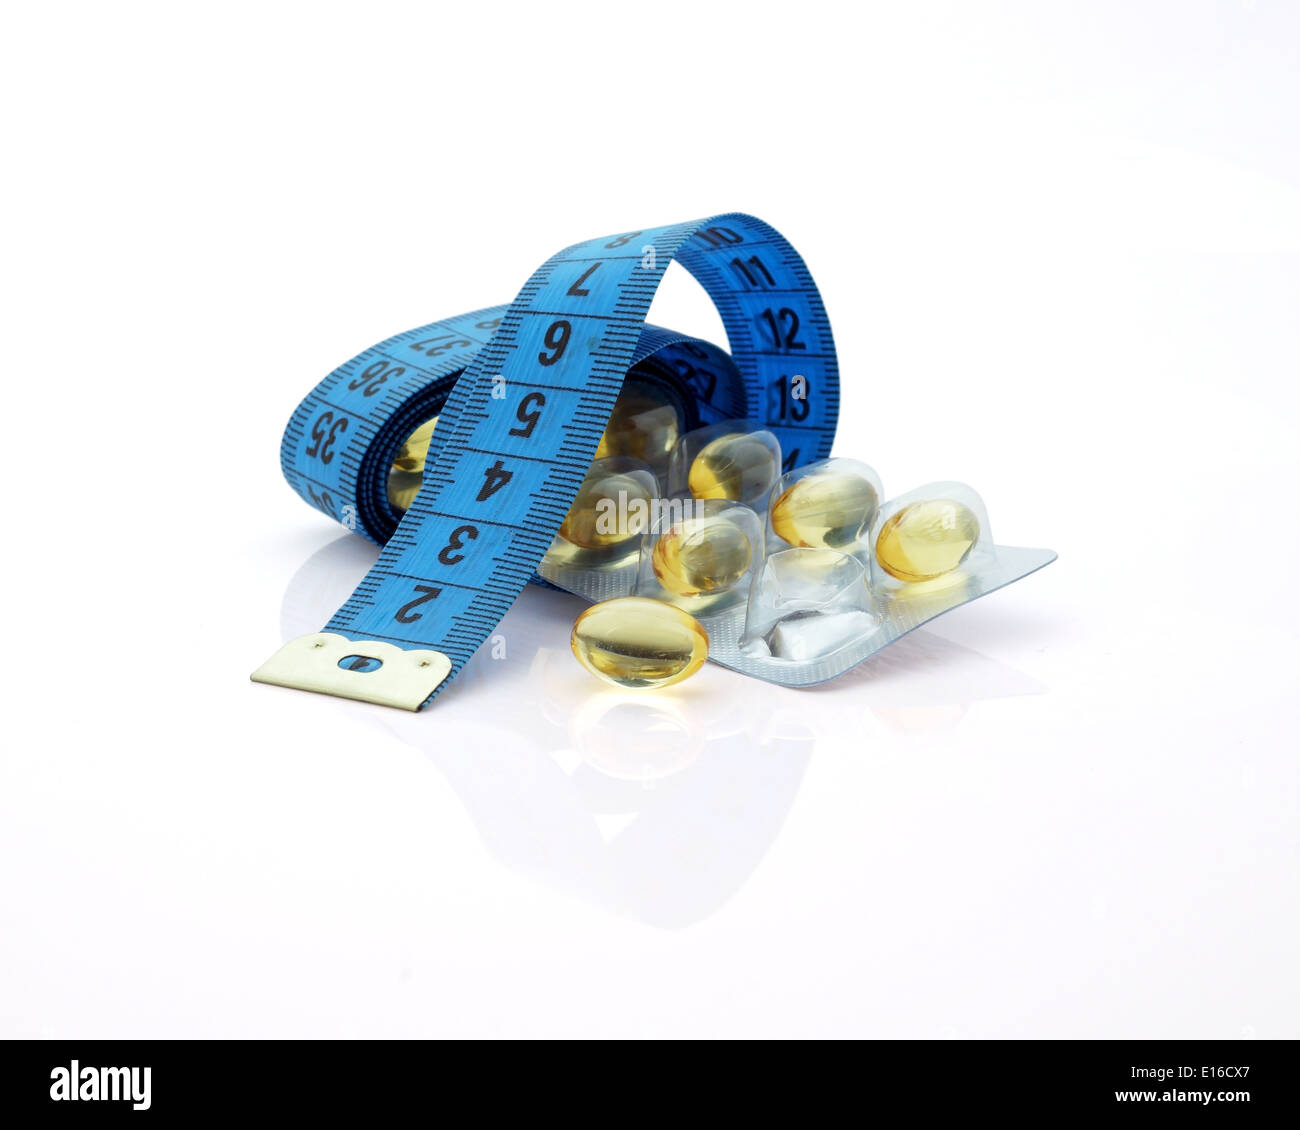 Supplements for Weight Loss. Measuring tape and medicines on white background Stock Photo